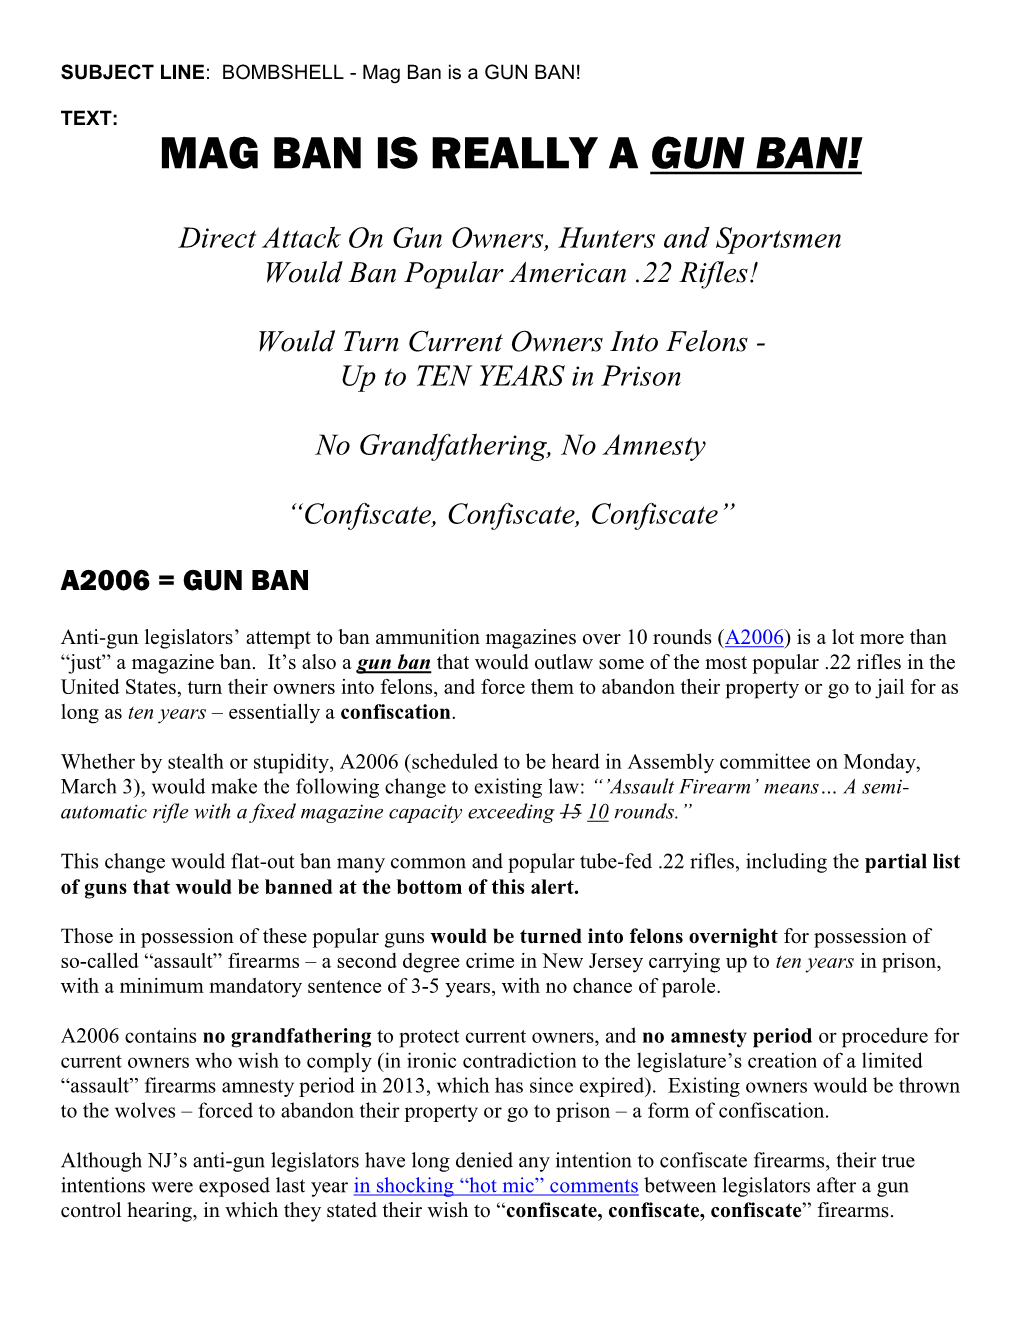 Subject Line: Anti-Gun Bill Count Now at 76